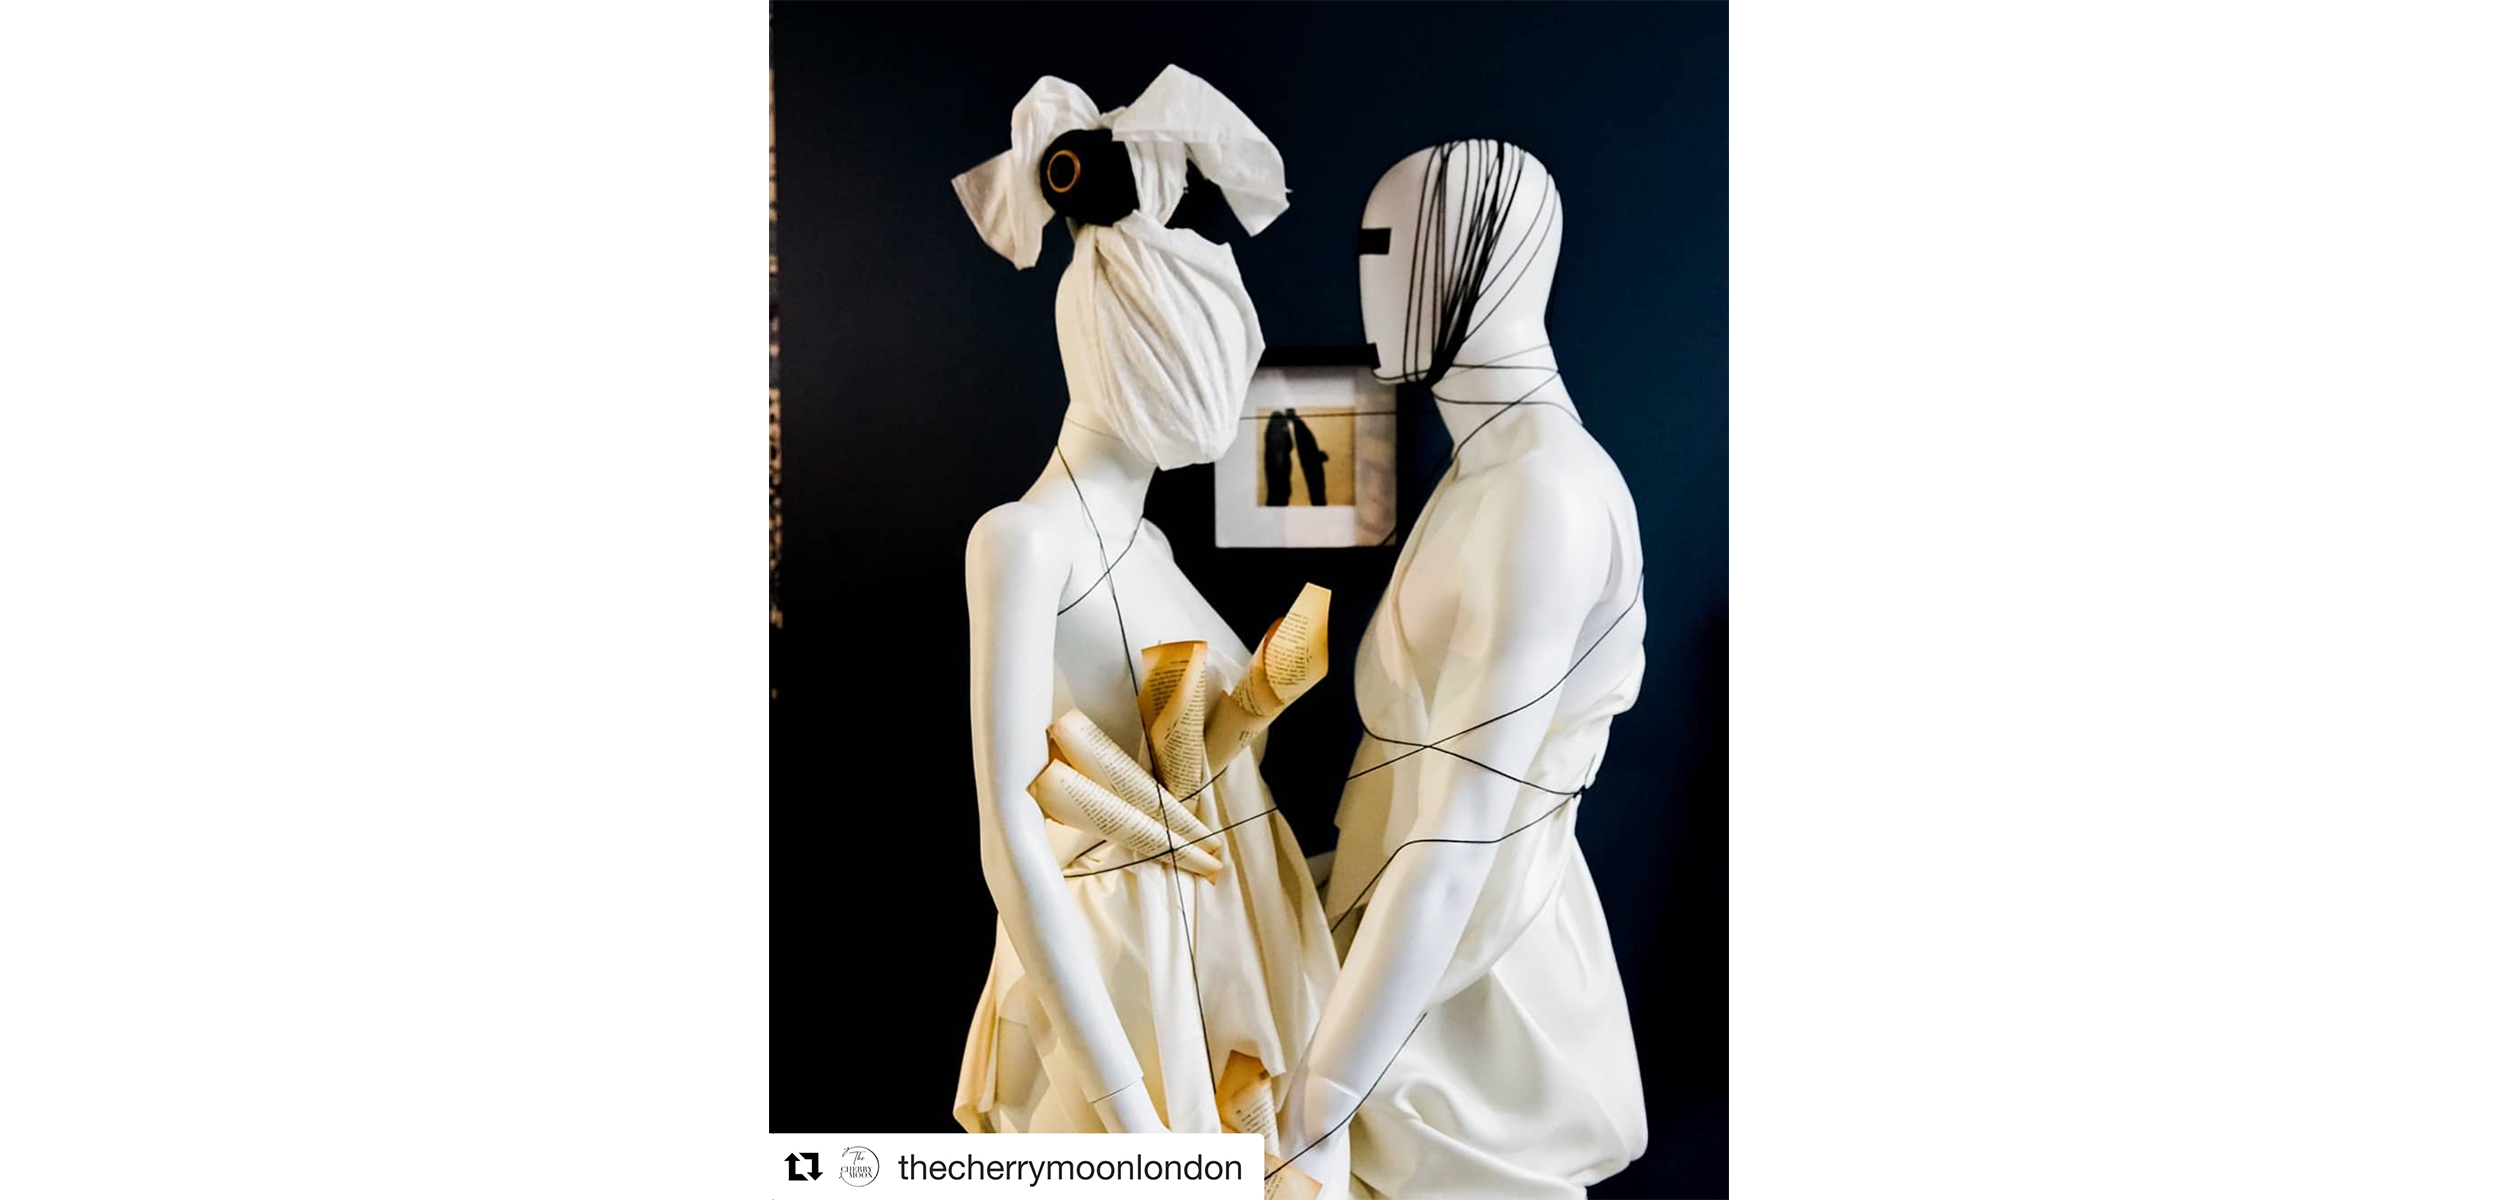 Artwork of two mannequins